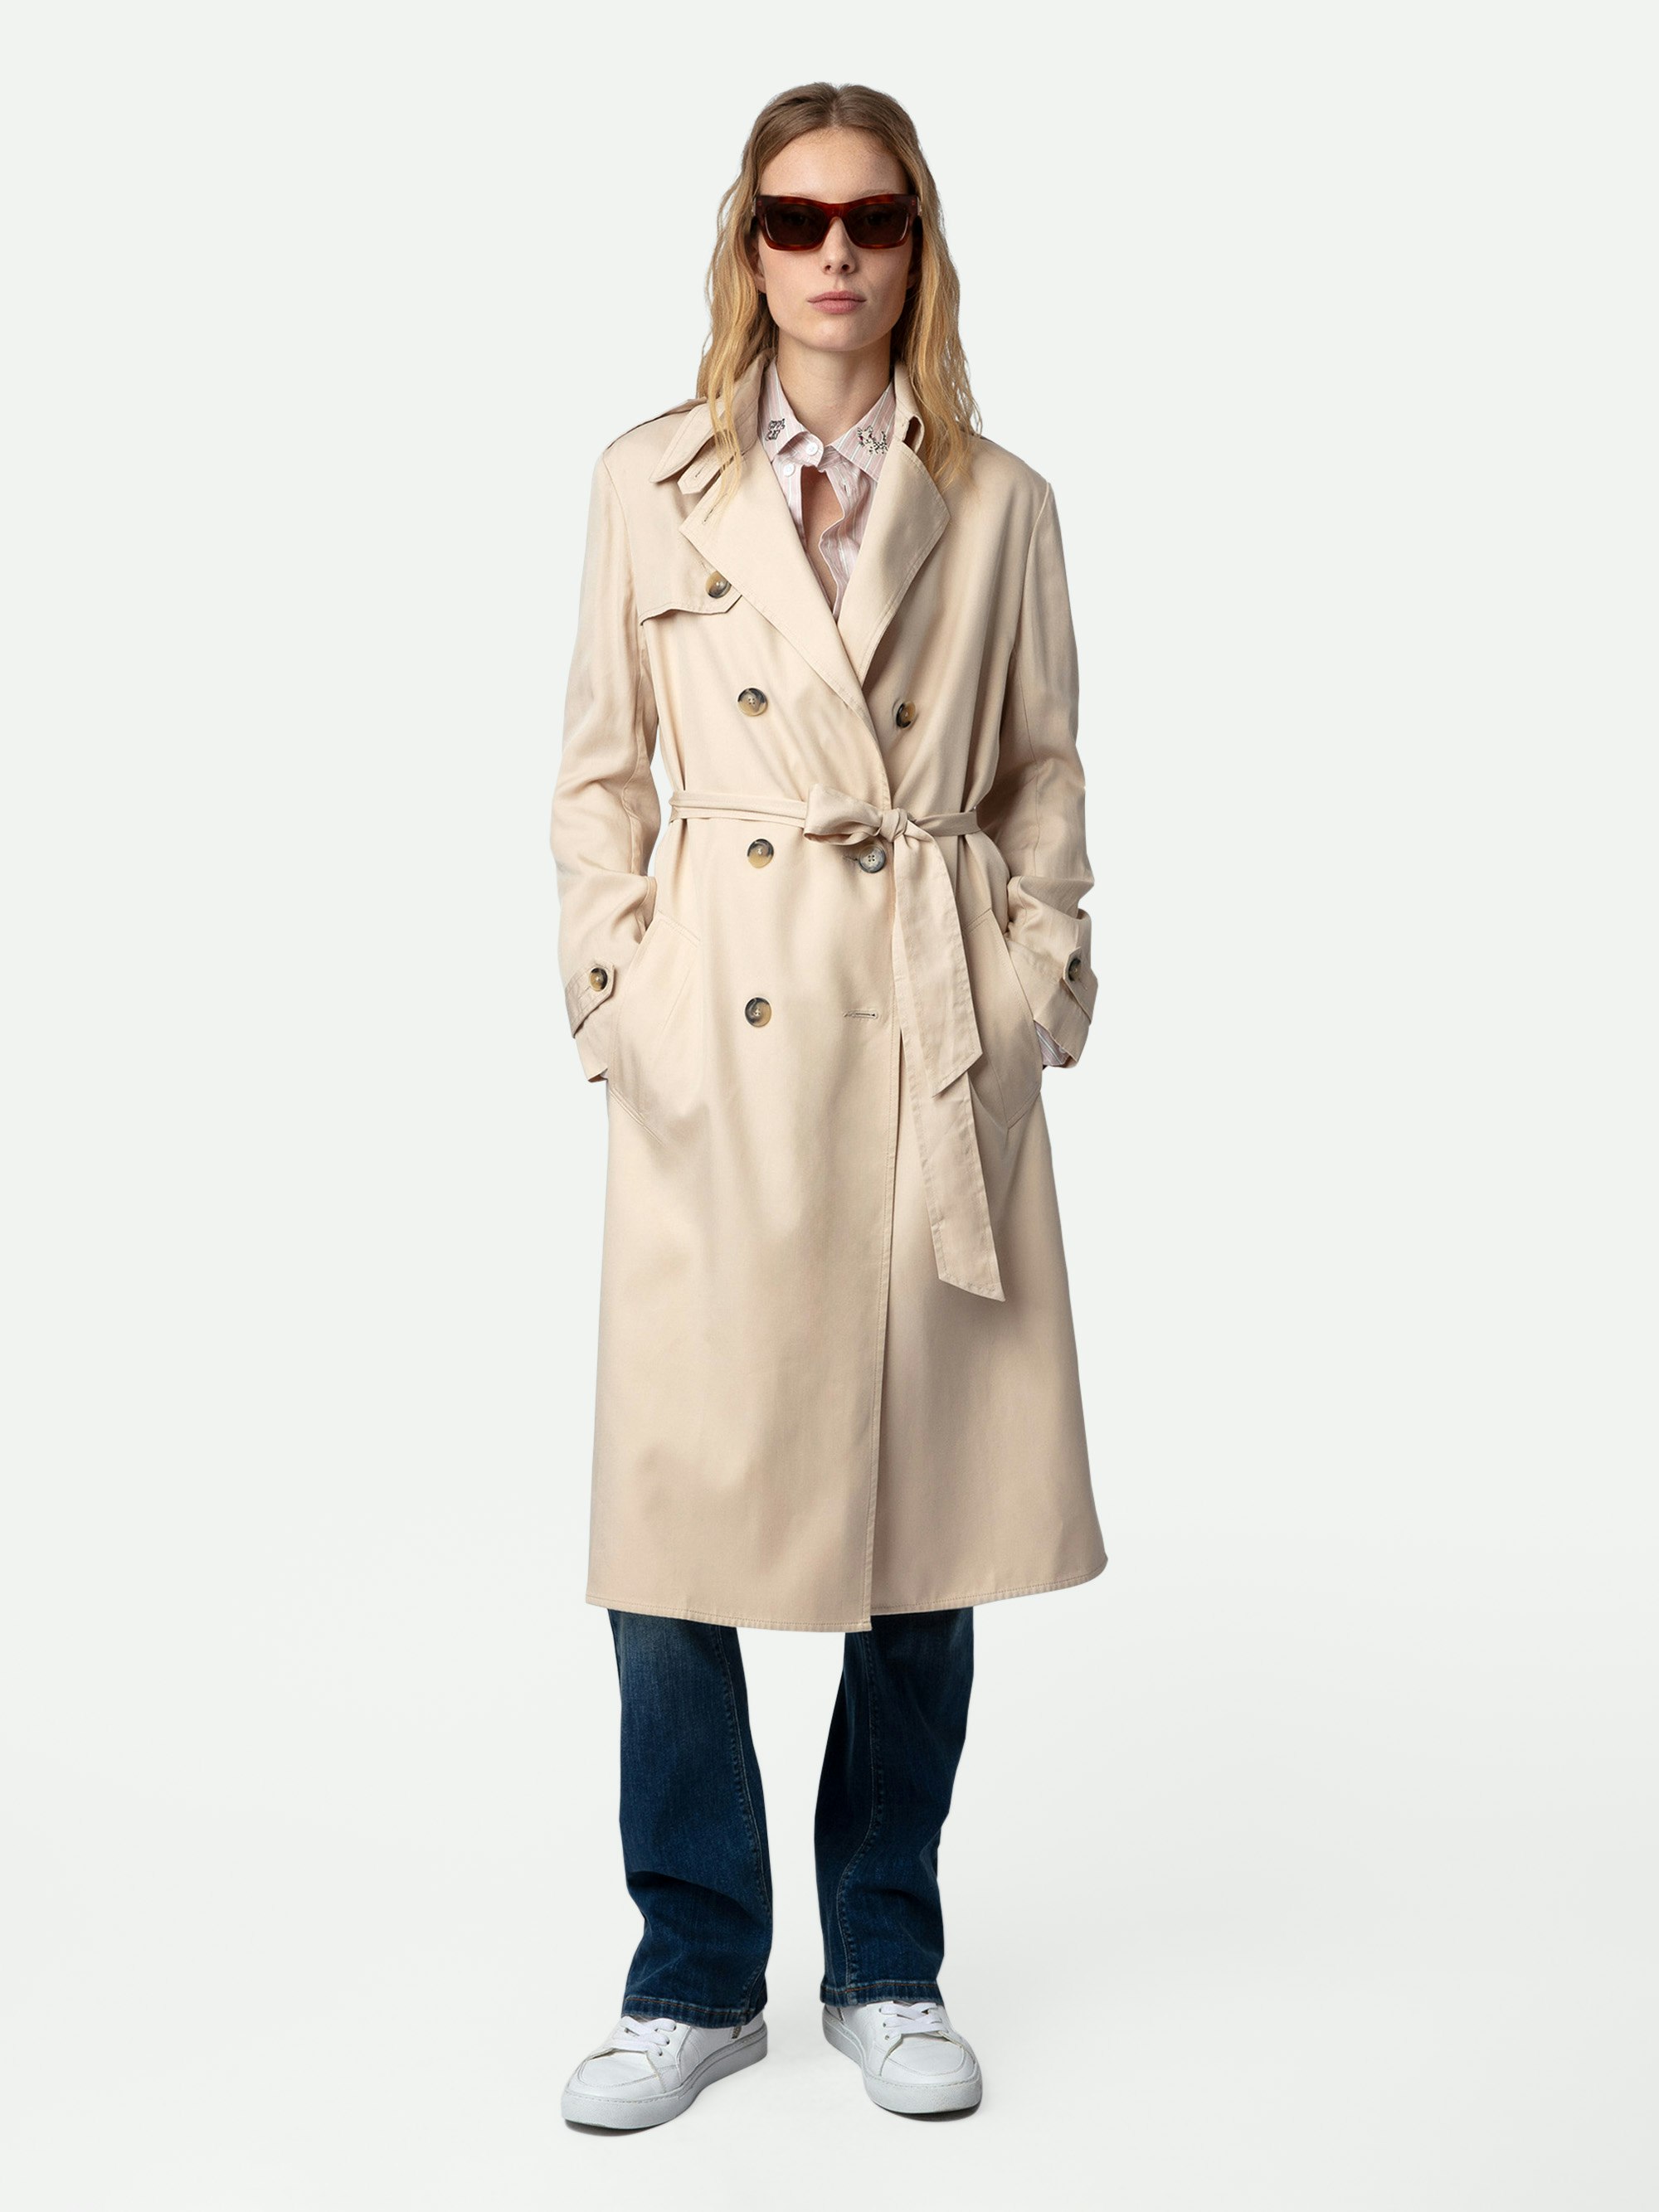 La Parisienne Trench Coat - Long beige trench coat with button closure and tie at the waist.